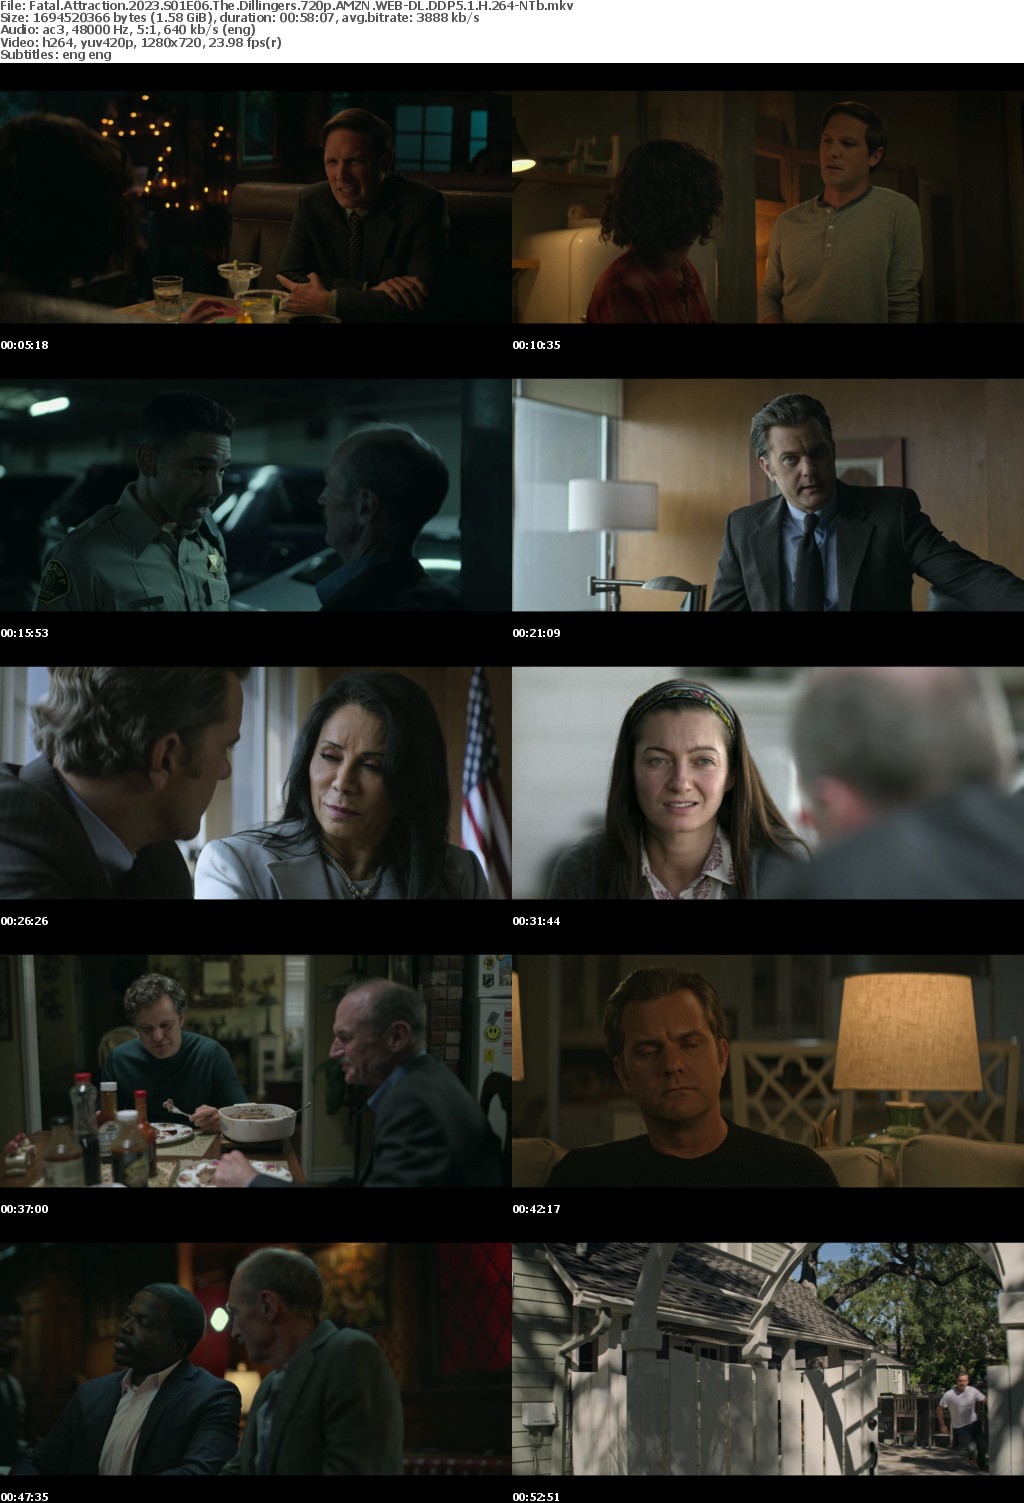 Fatal Attraction 2023 S01E06 The Dillingers 720p AMZN WEBRip DDP5 1 x264-NTb